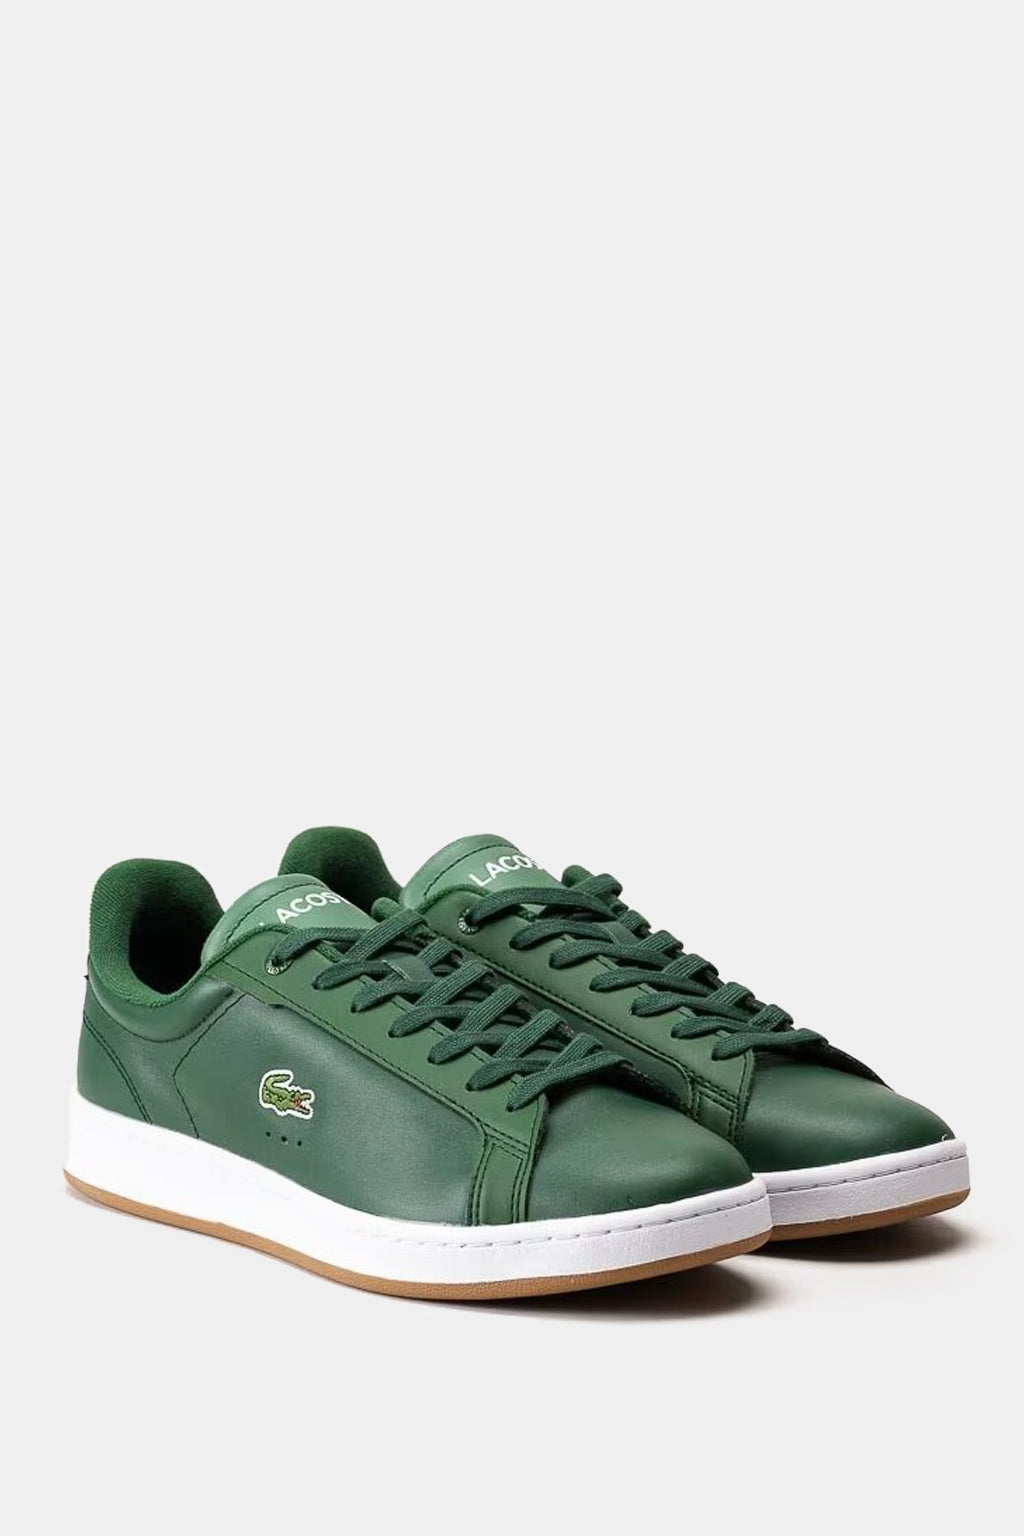 Lacoste - Carnaby Pro - Green leather sneakers